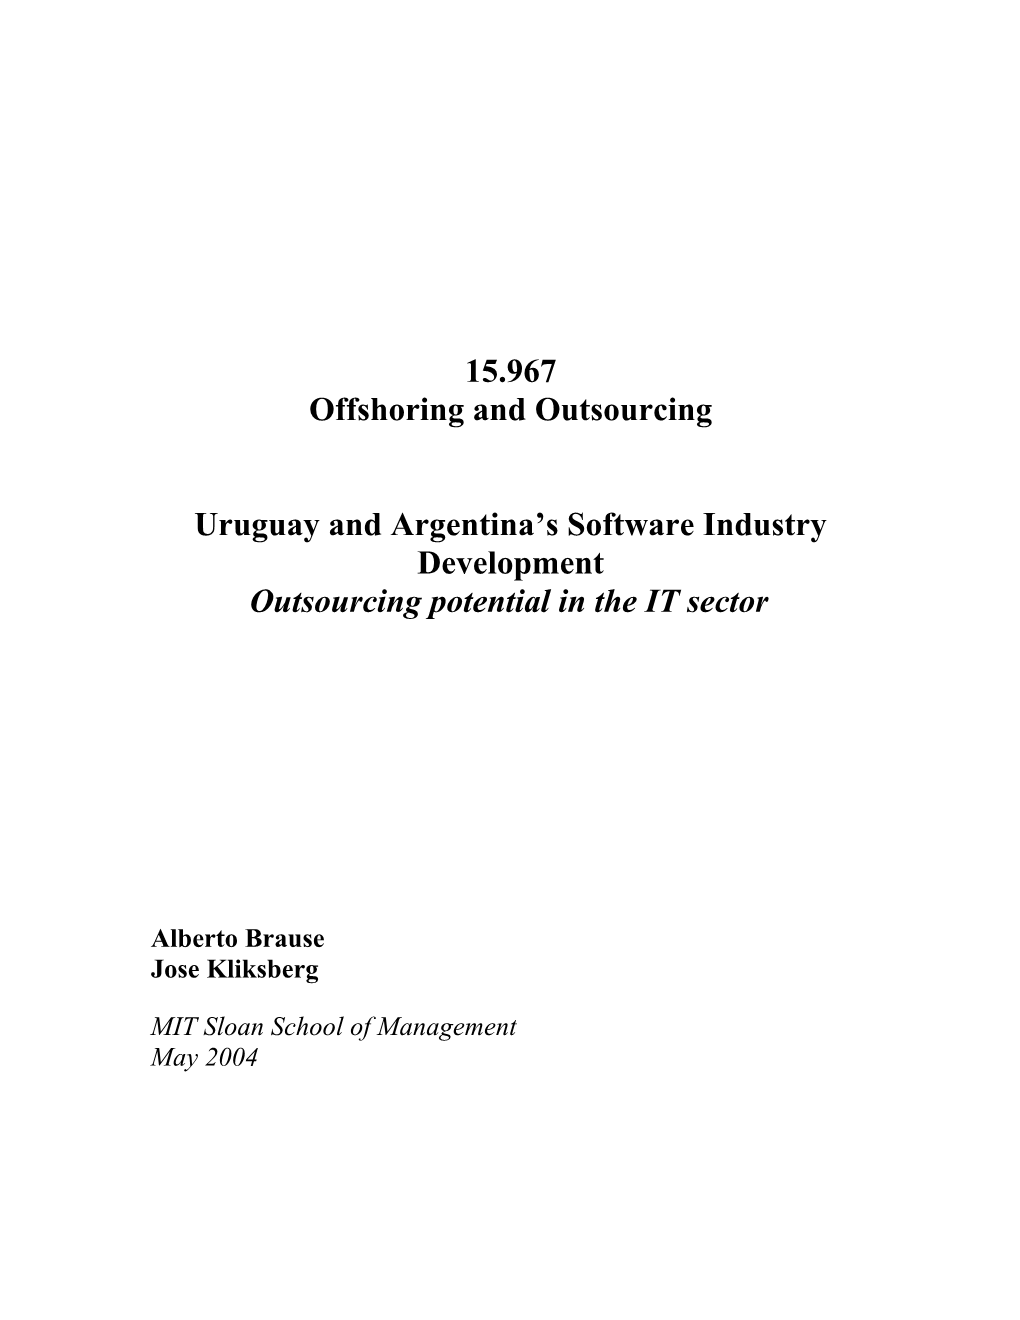 Uruguay and Argentina S Software Industry Development